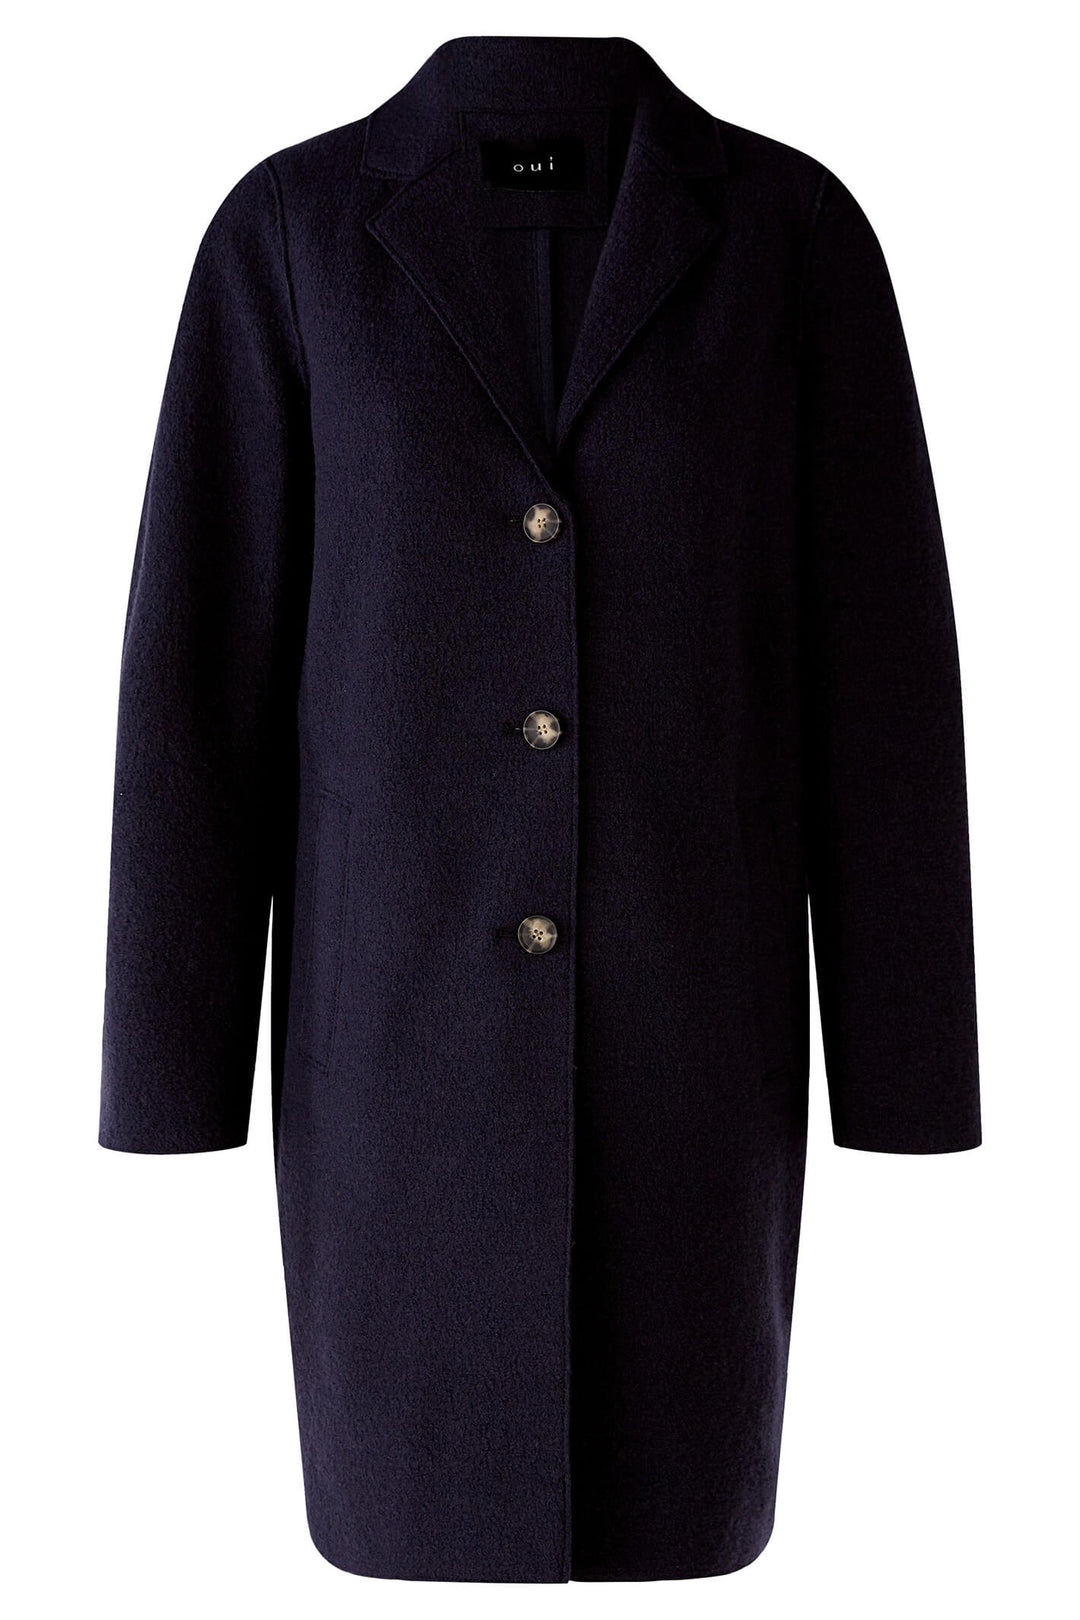 Oui 79918 5742 Mayson Dark Blue Button Front Boiled Wool Coat - Shirley Allum Boutique